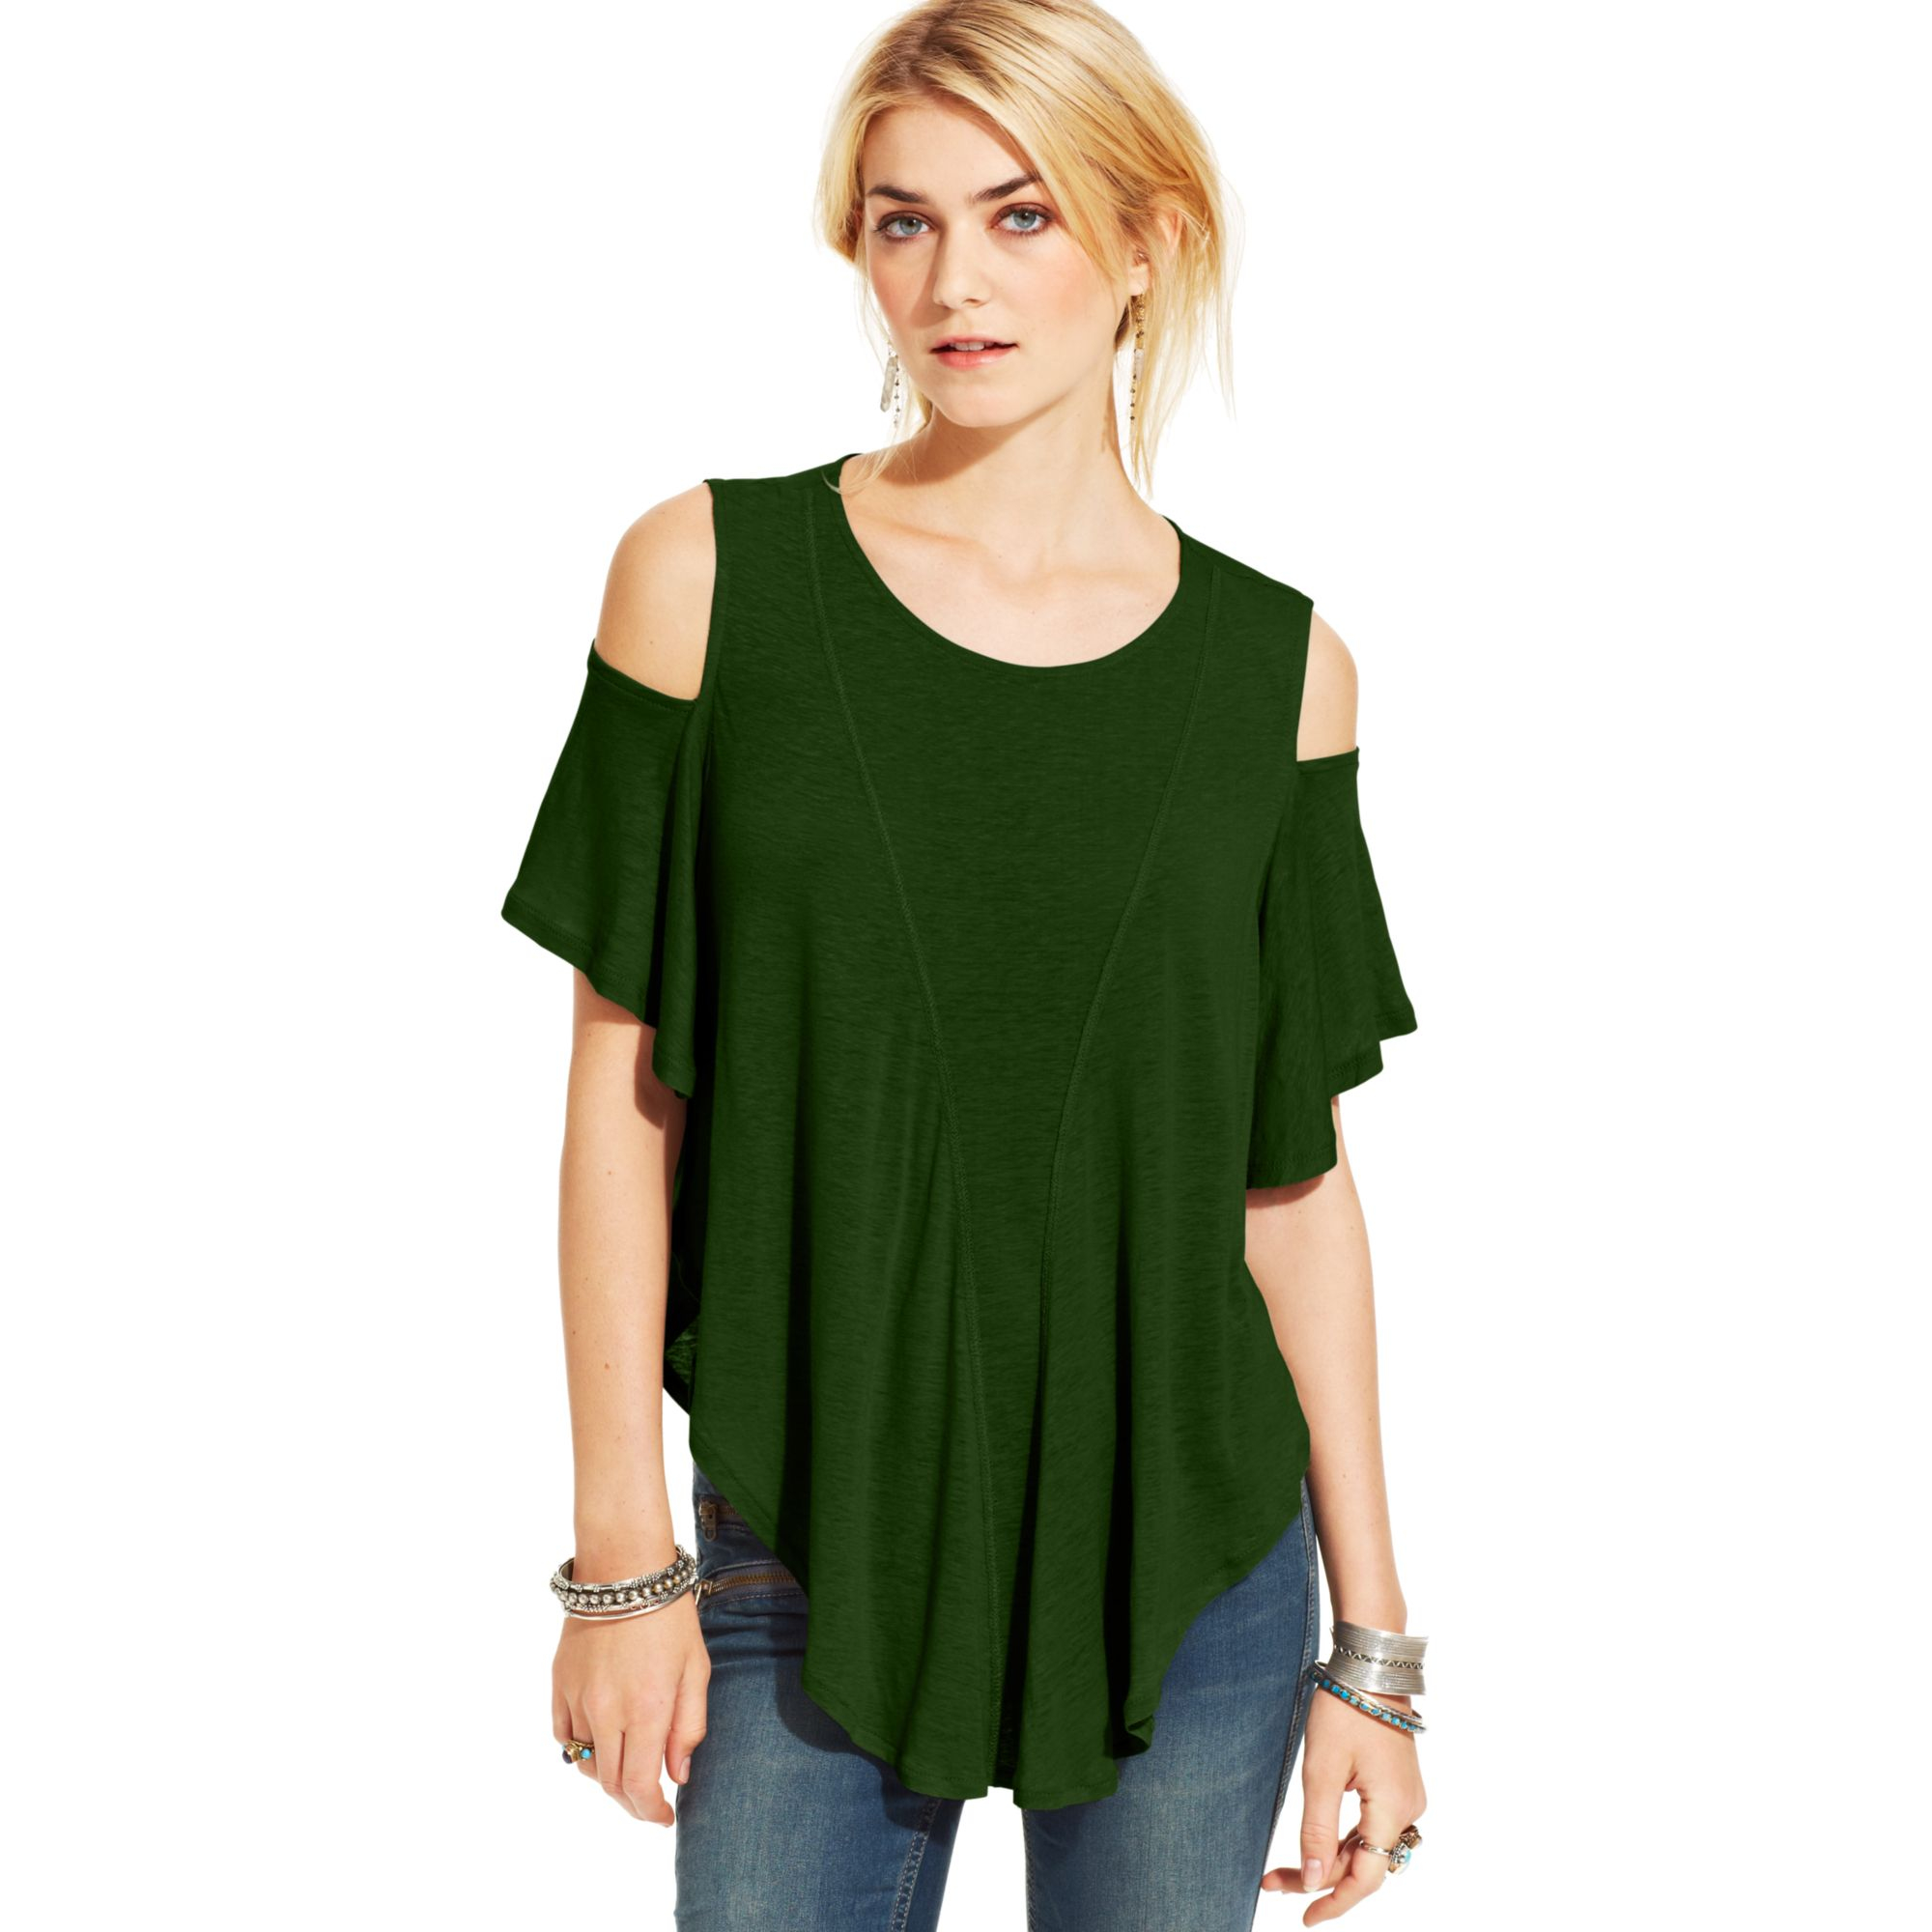 Lyst - Free People Cut Out Top in Green